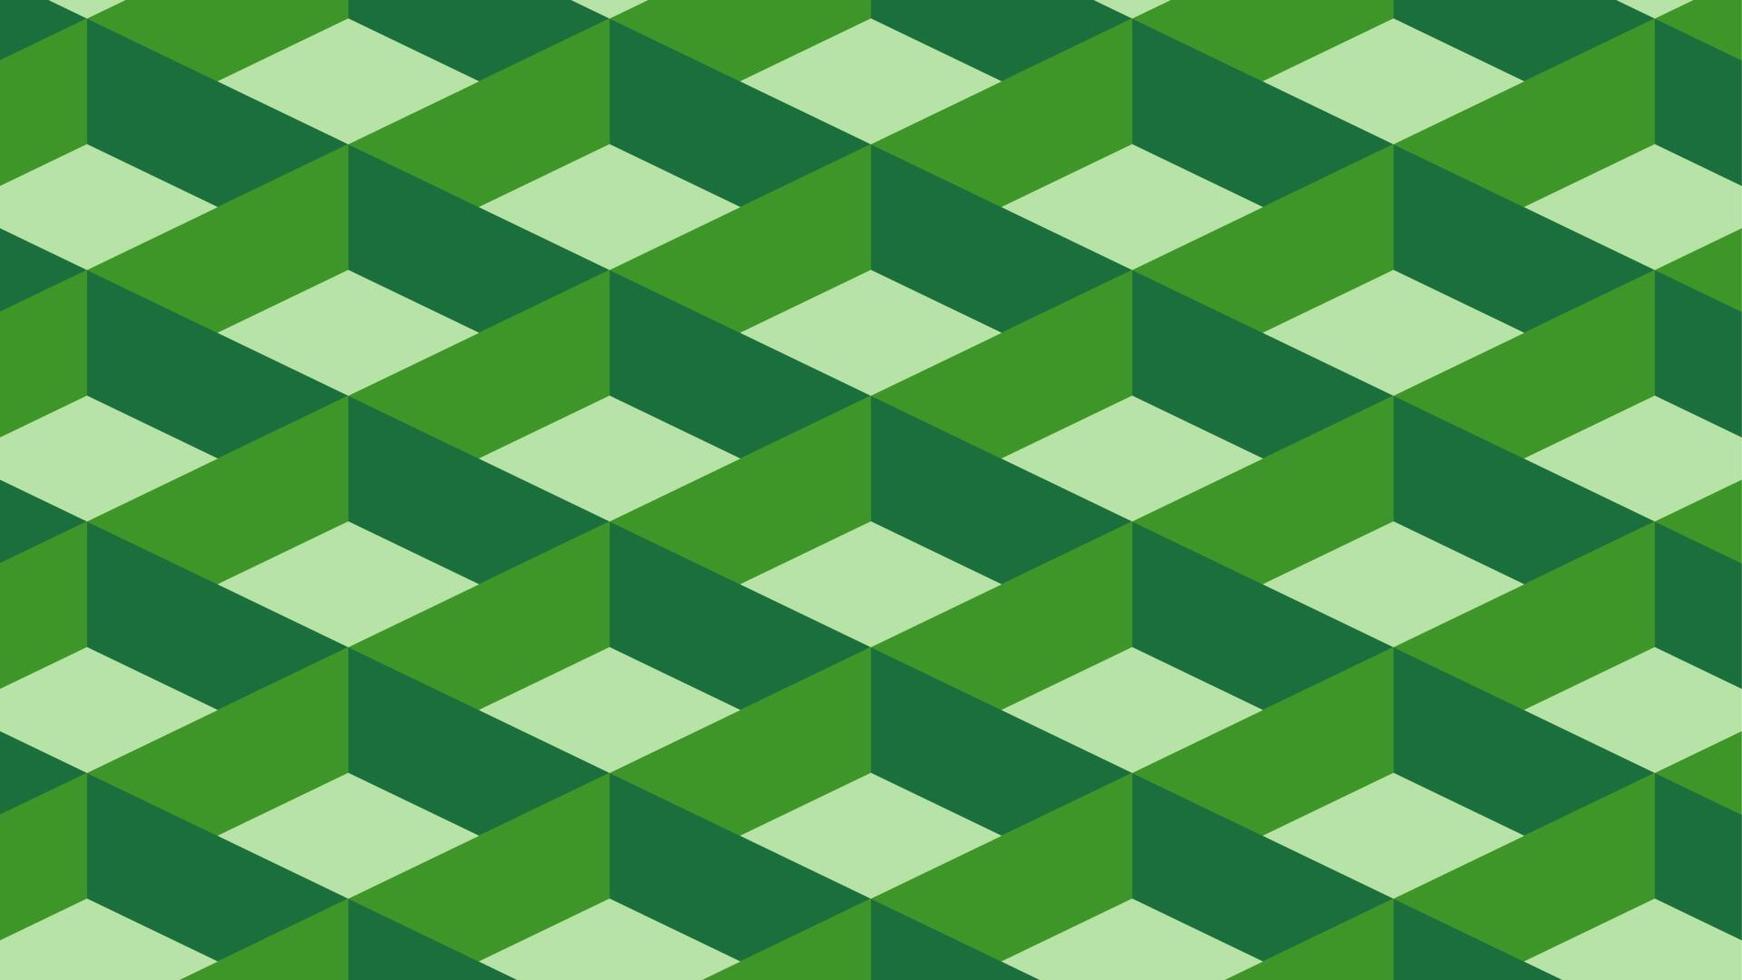 Pattern of 3d optical illusion. Pattern of illusion block. Vector illustration of 3d green square. Geometric illusive for design graphic, background, wallpaper, layout or art